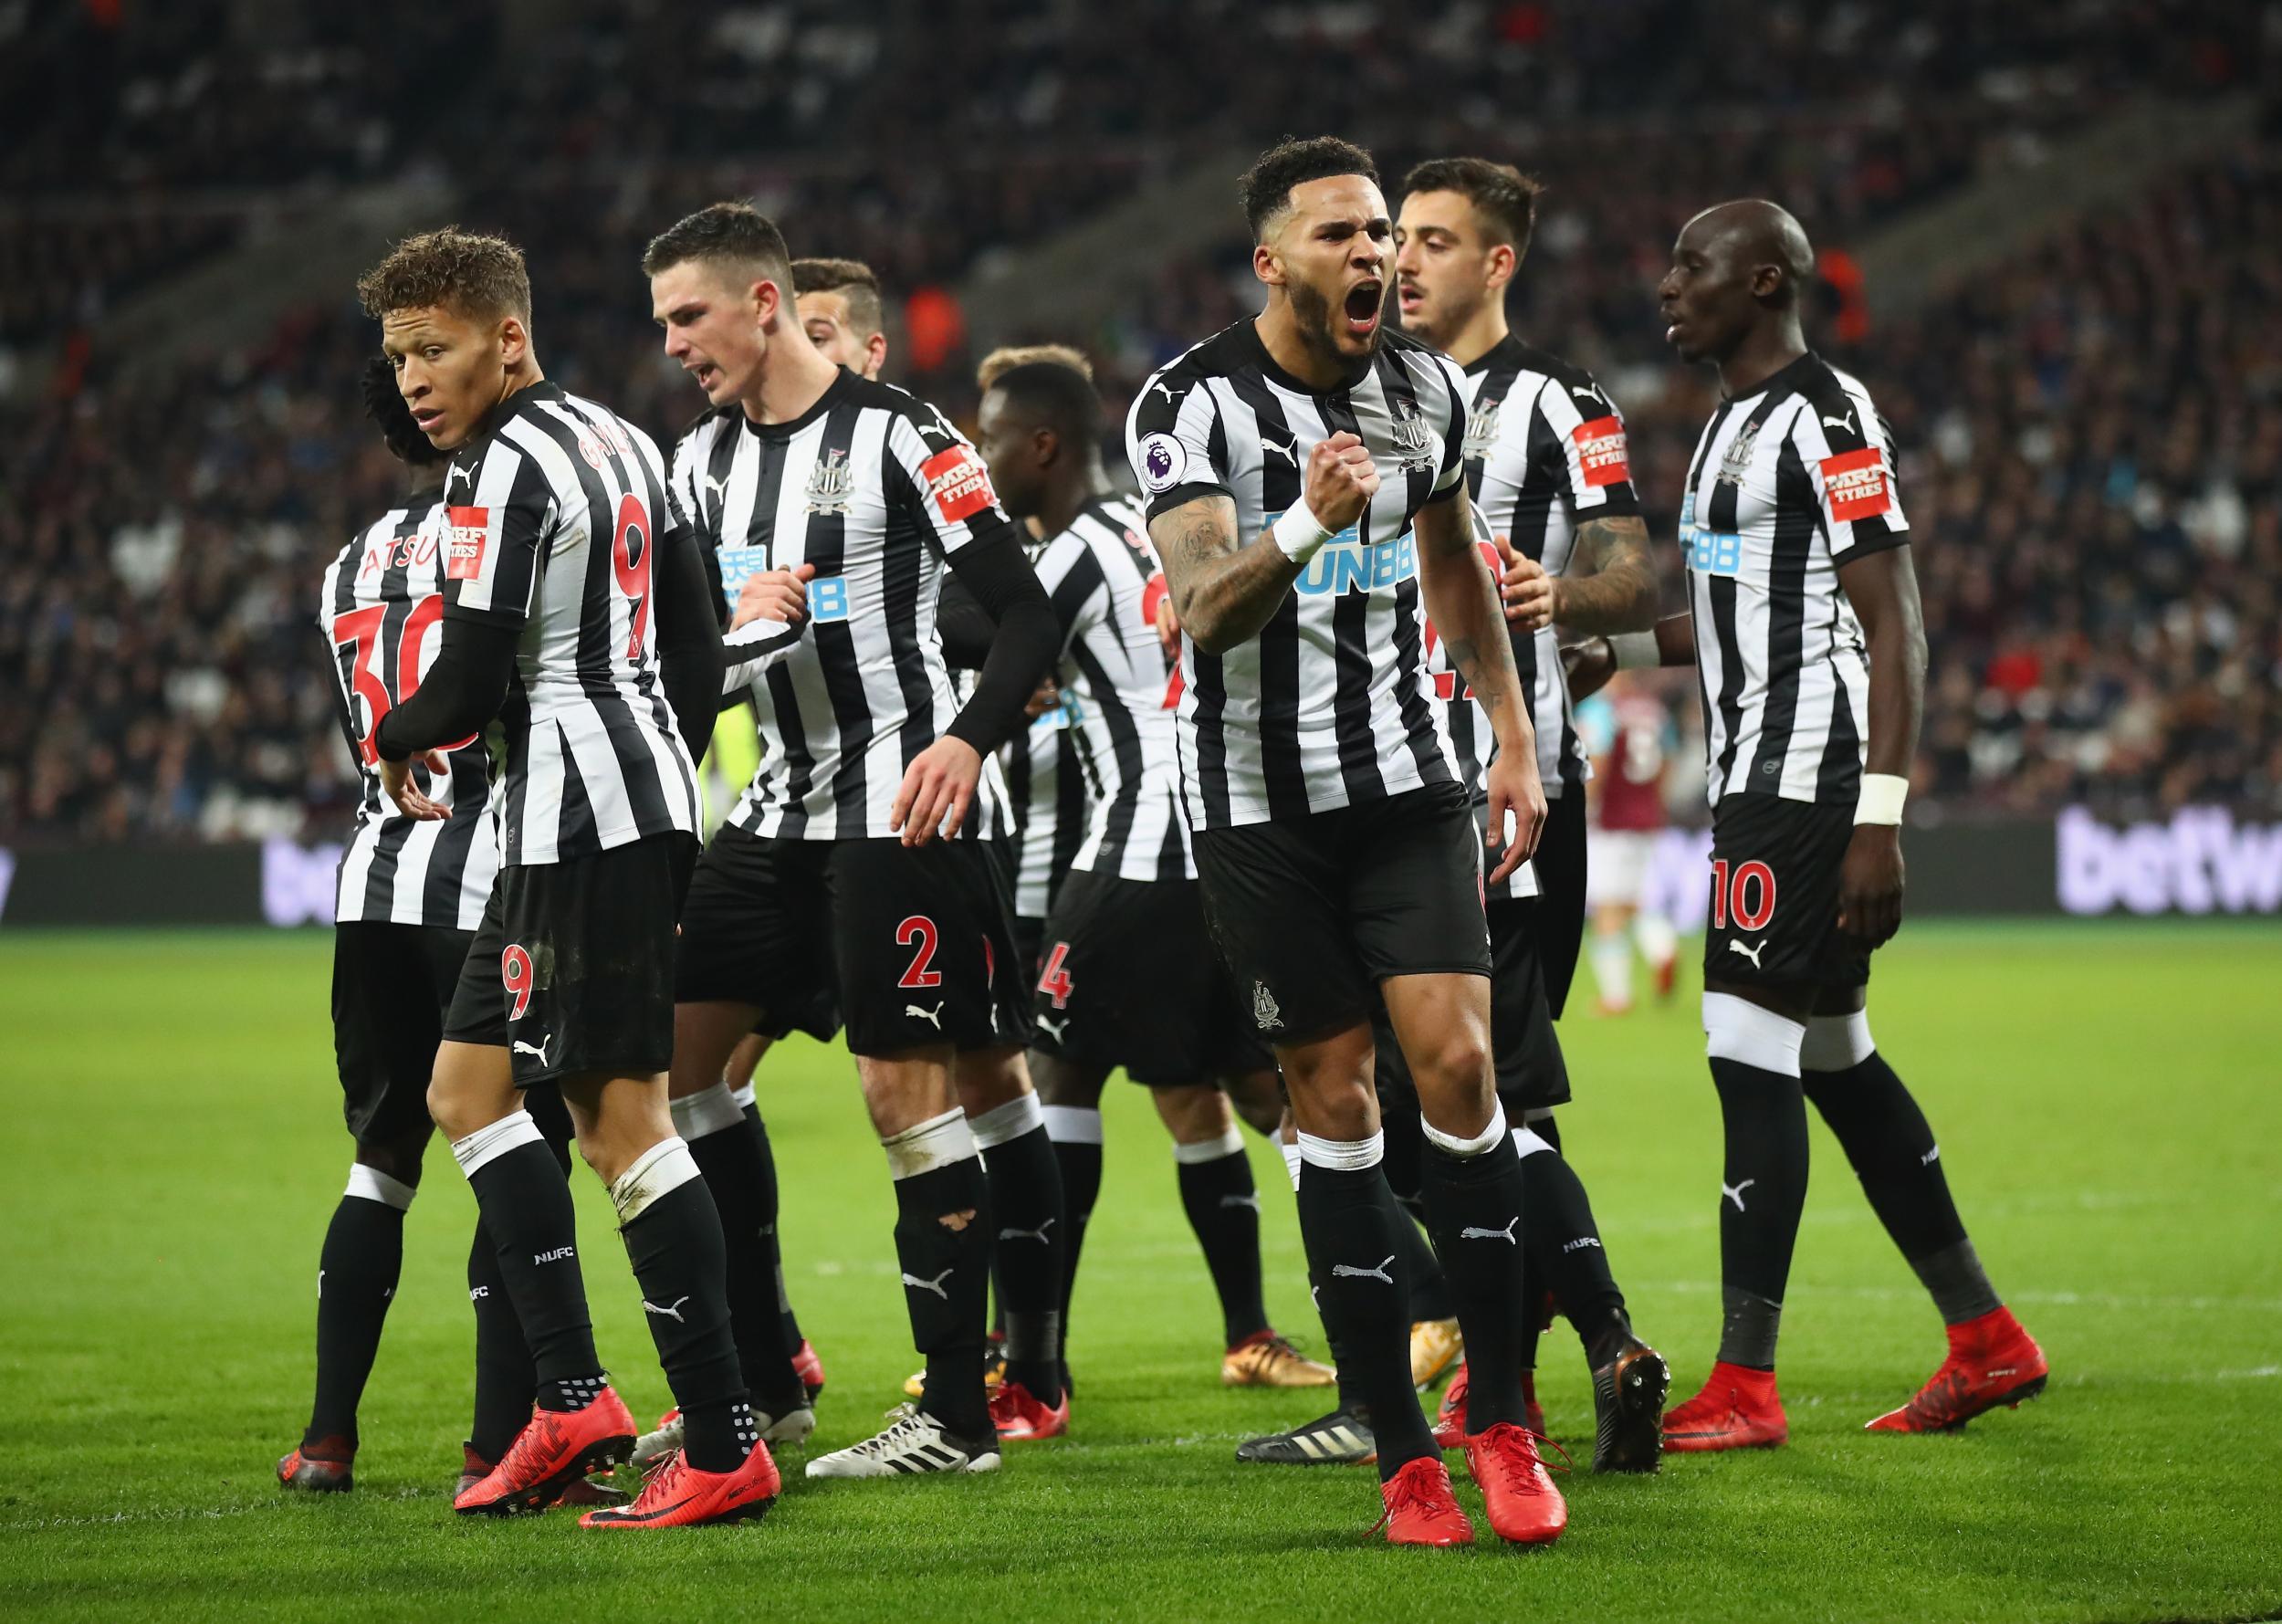 This was Newcastle's first win in 10 league games